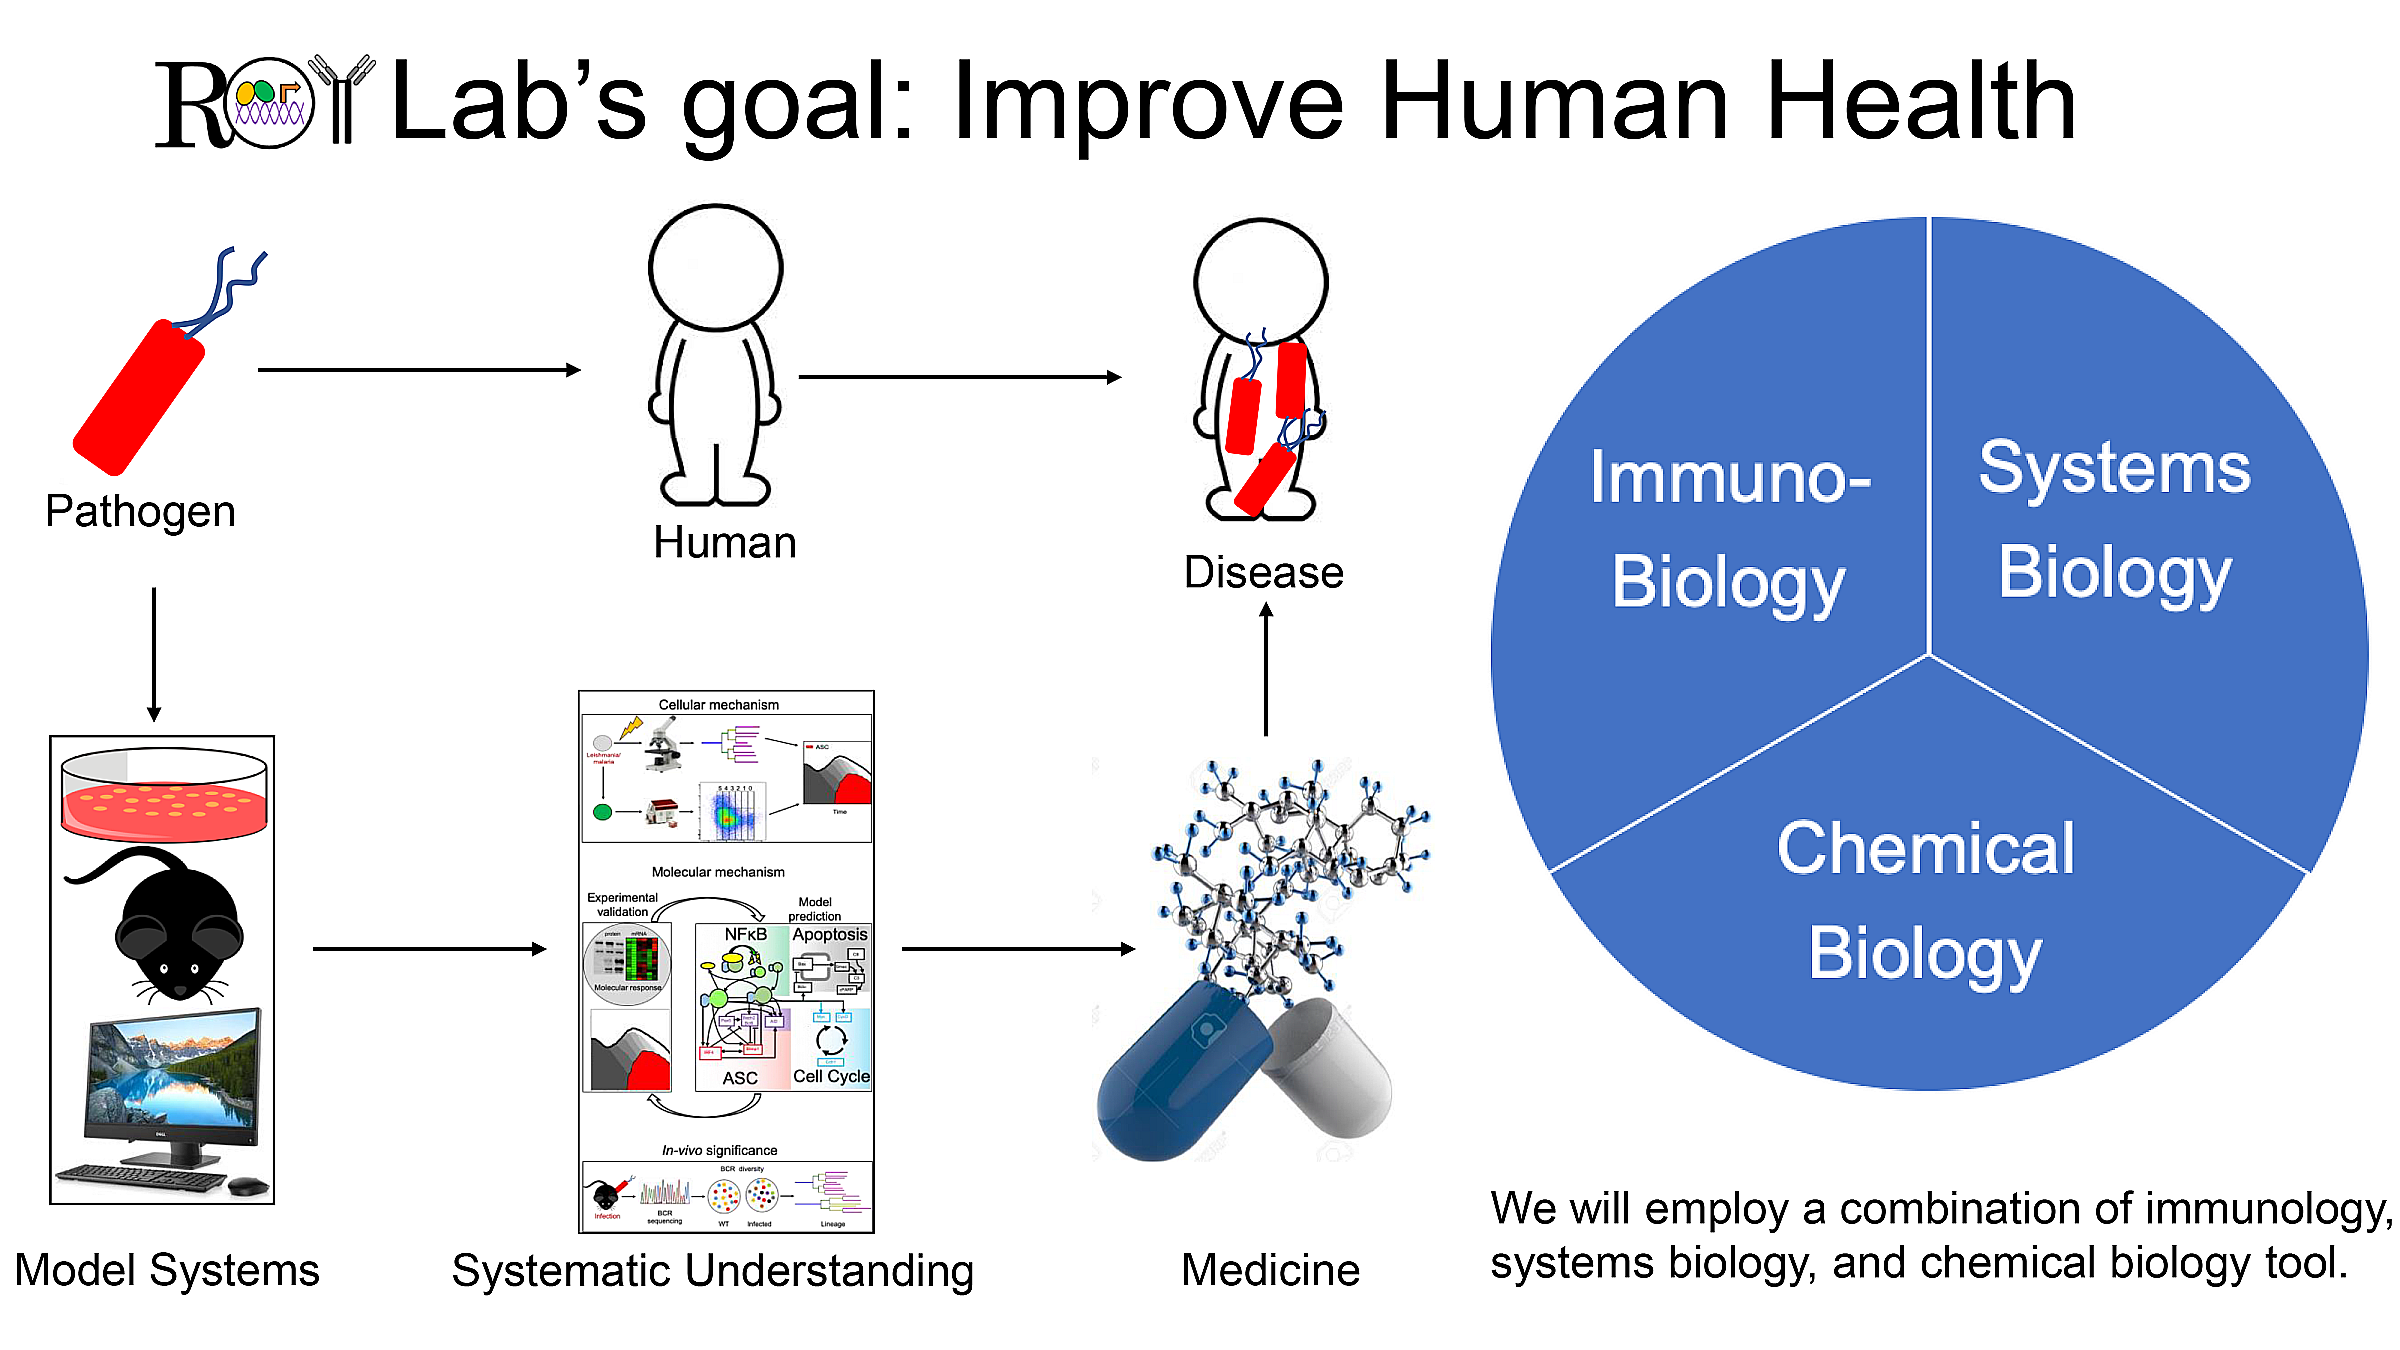 The Roy Lab's goal is to improve Human Health diagram